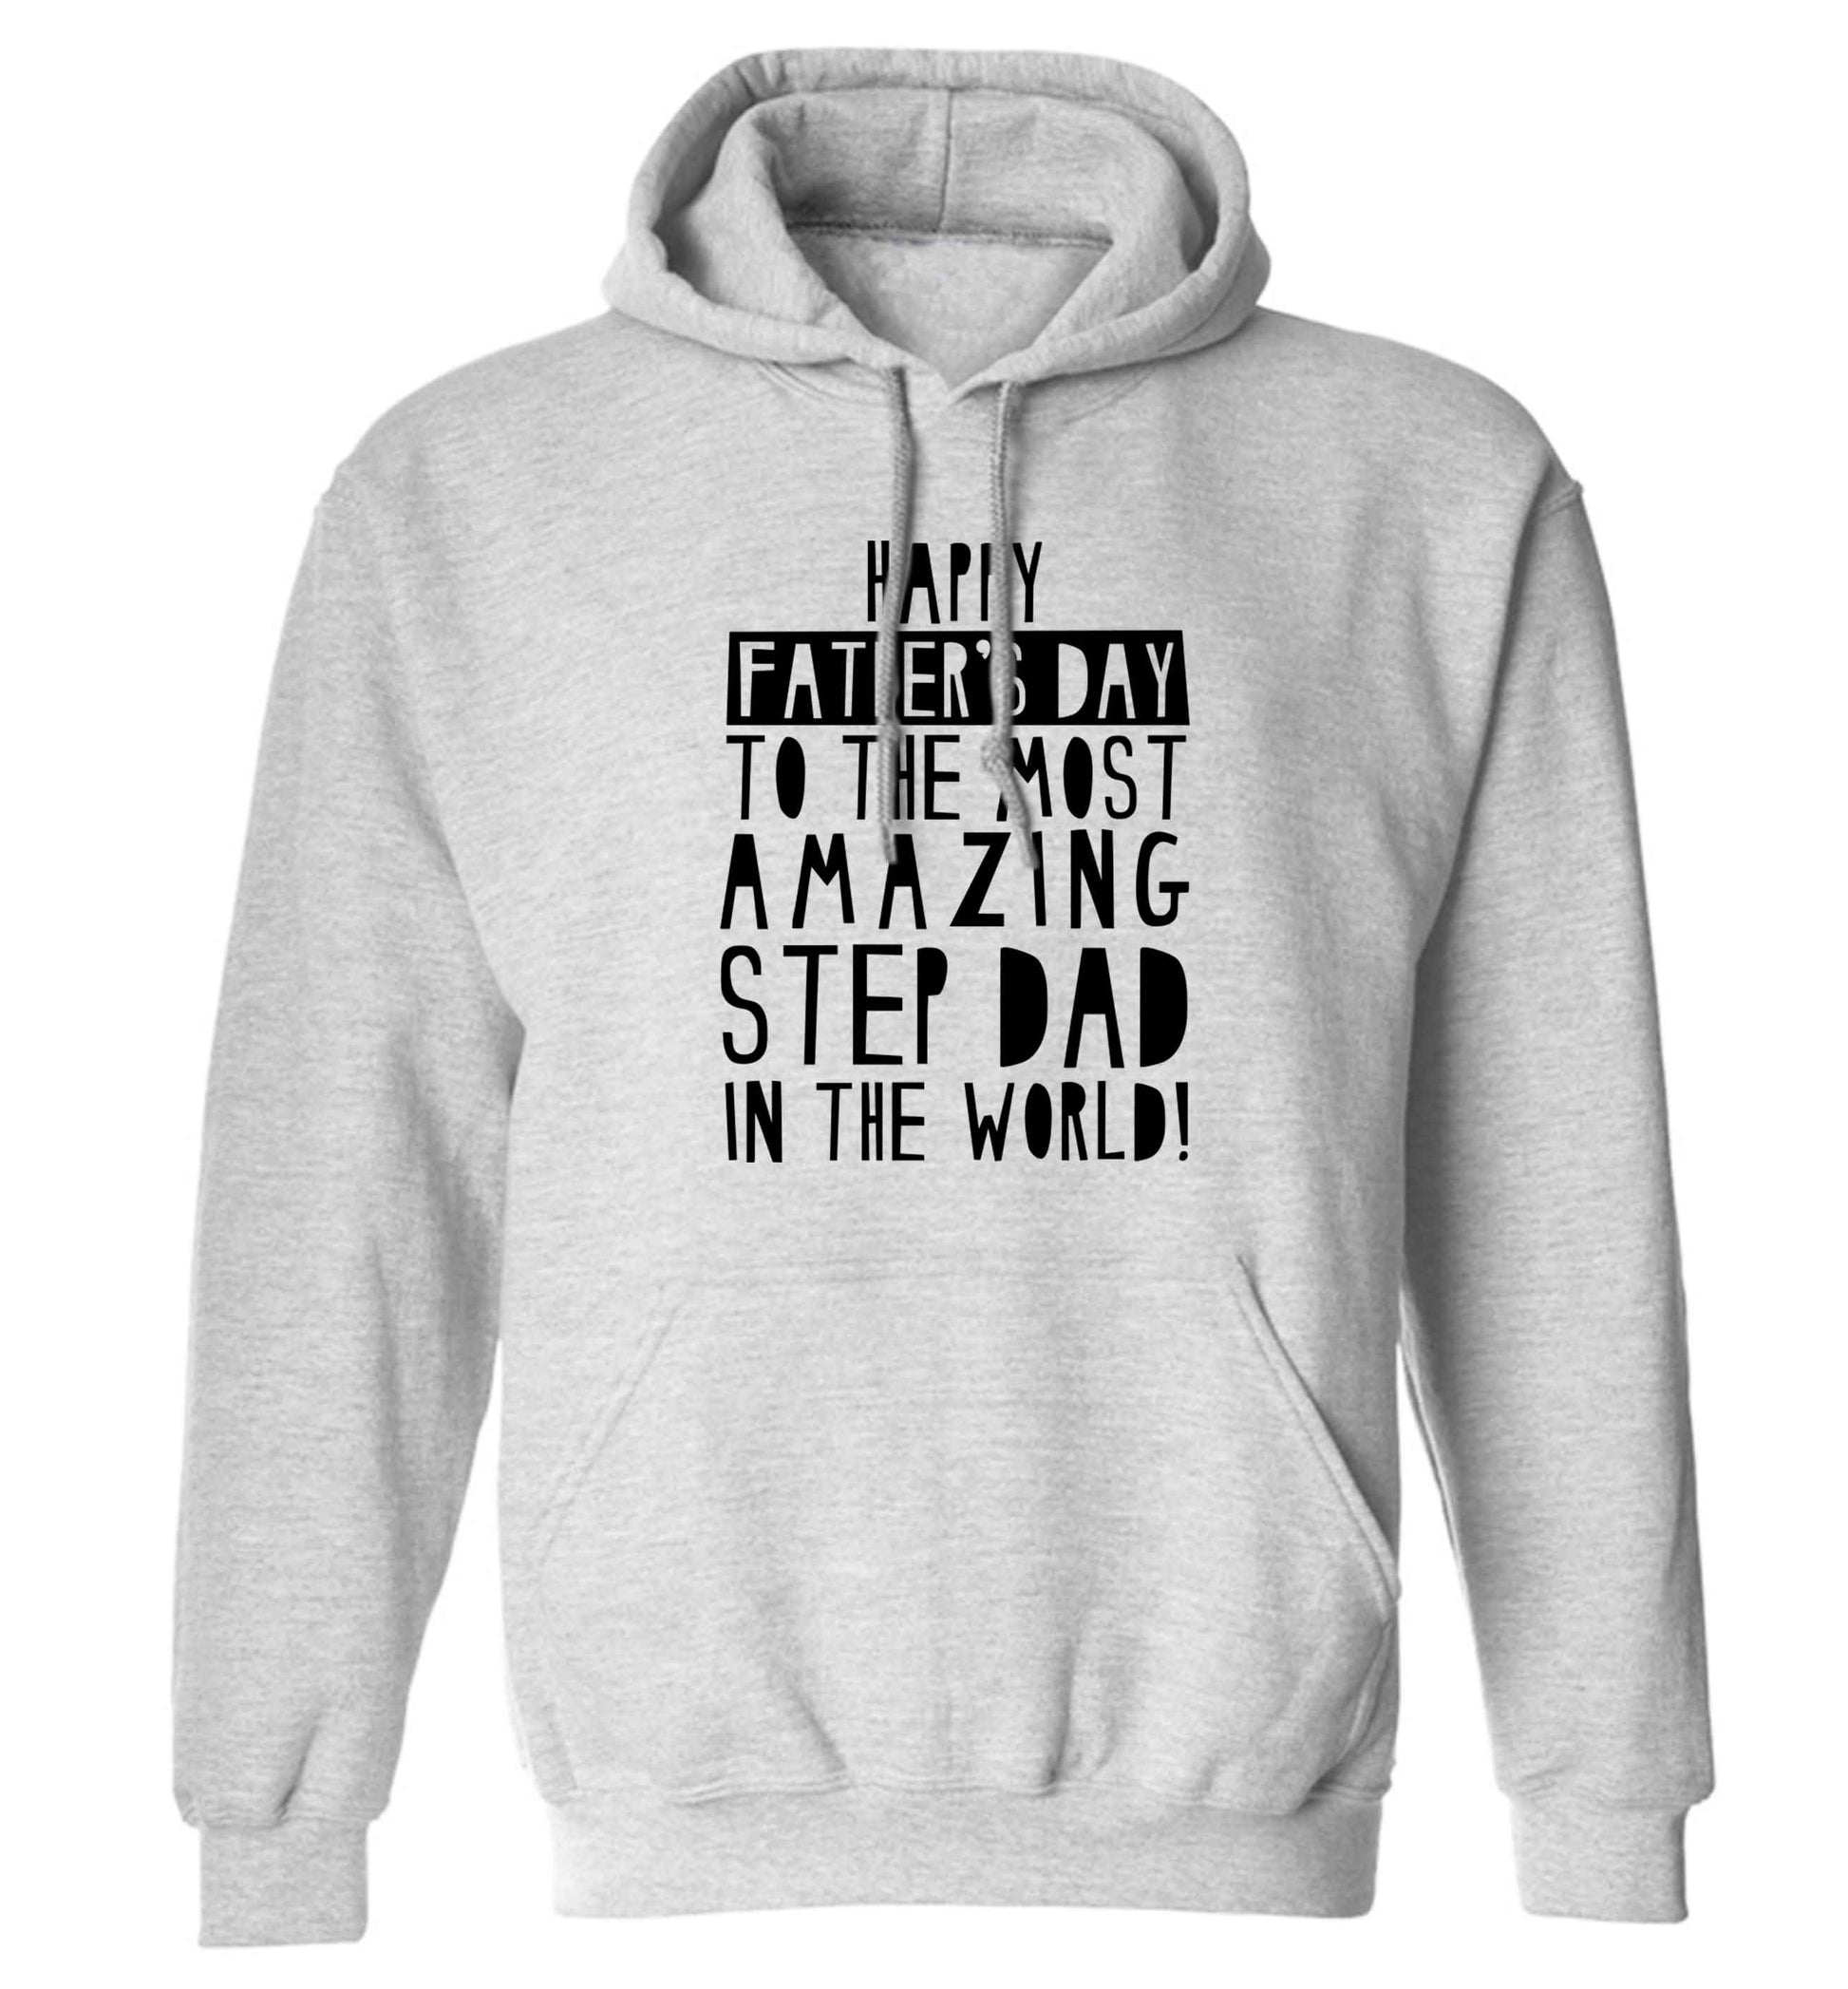 Happy Father's day to the best step dad in the world adults unisex grey hoodie 2XL